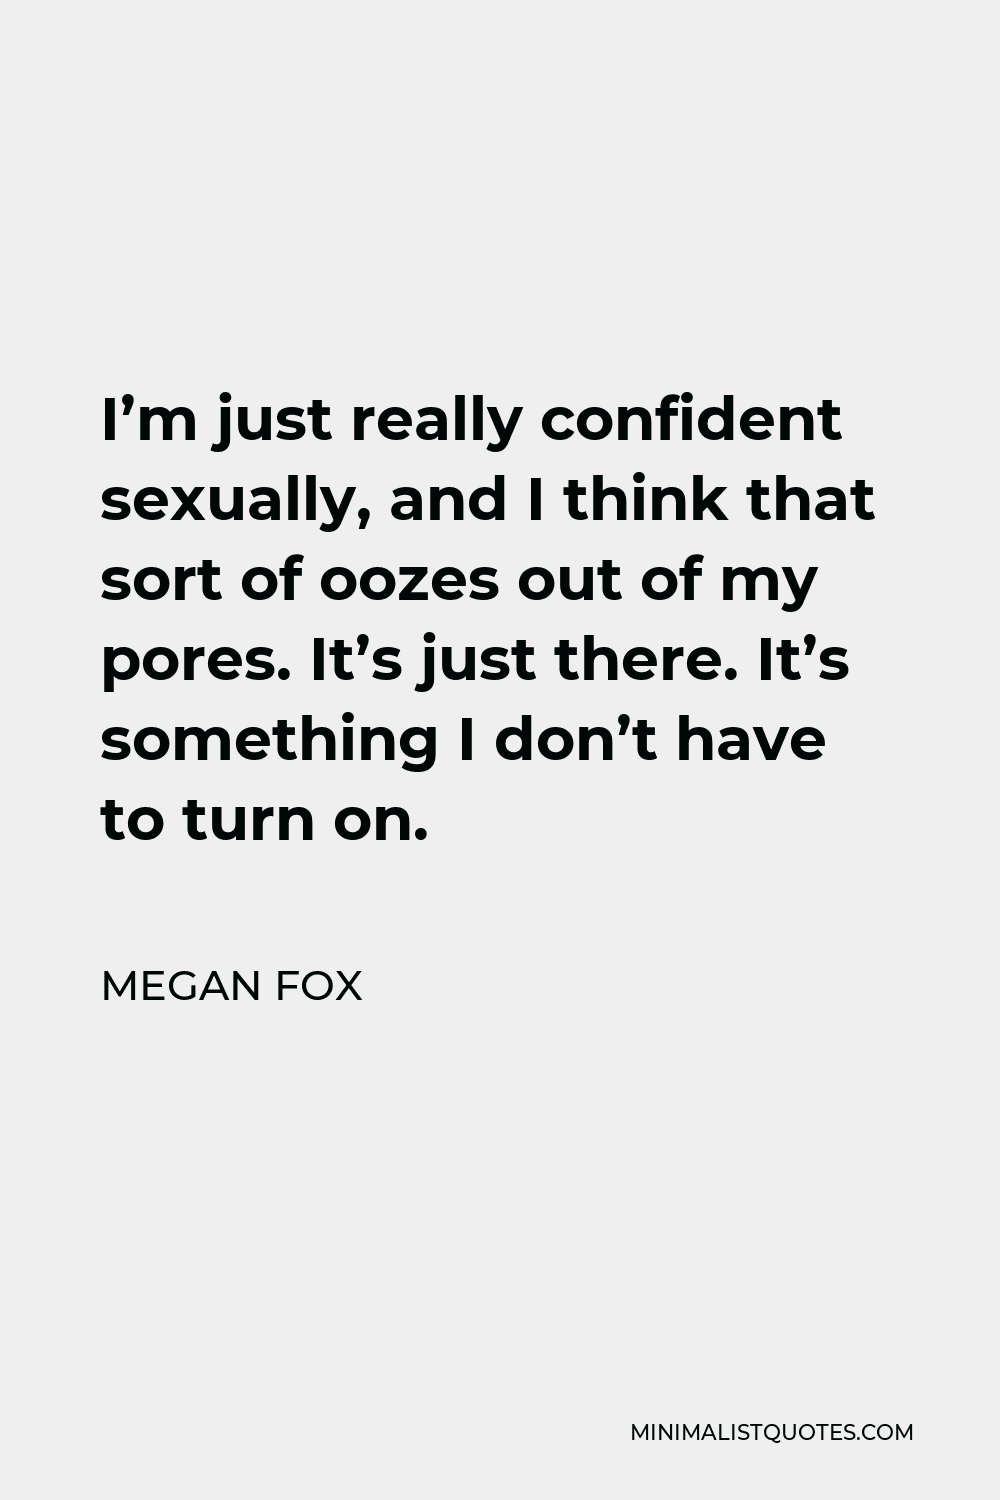 Megan Fox Quote I M Just Really Confident Sexually And I Think That Sort Of Oozes Out Of My